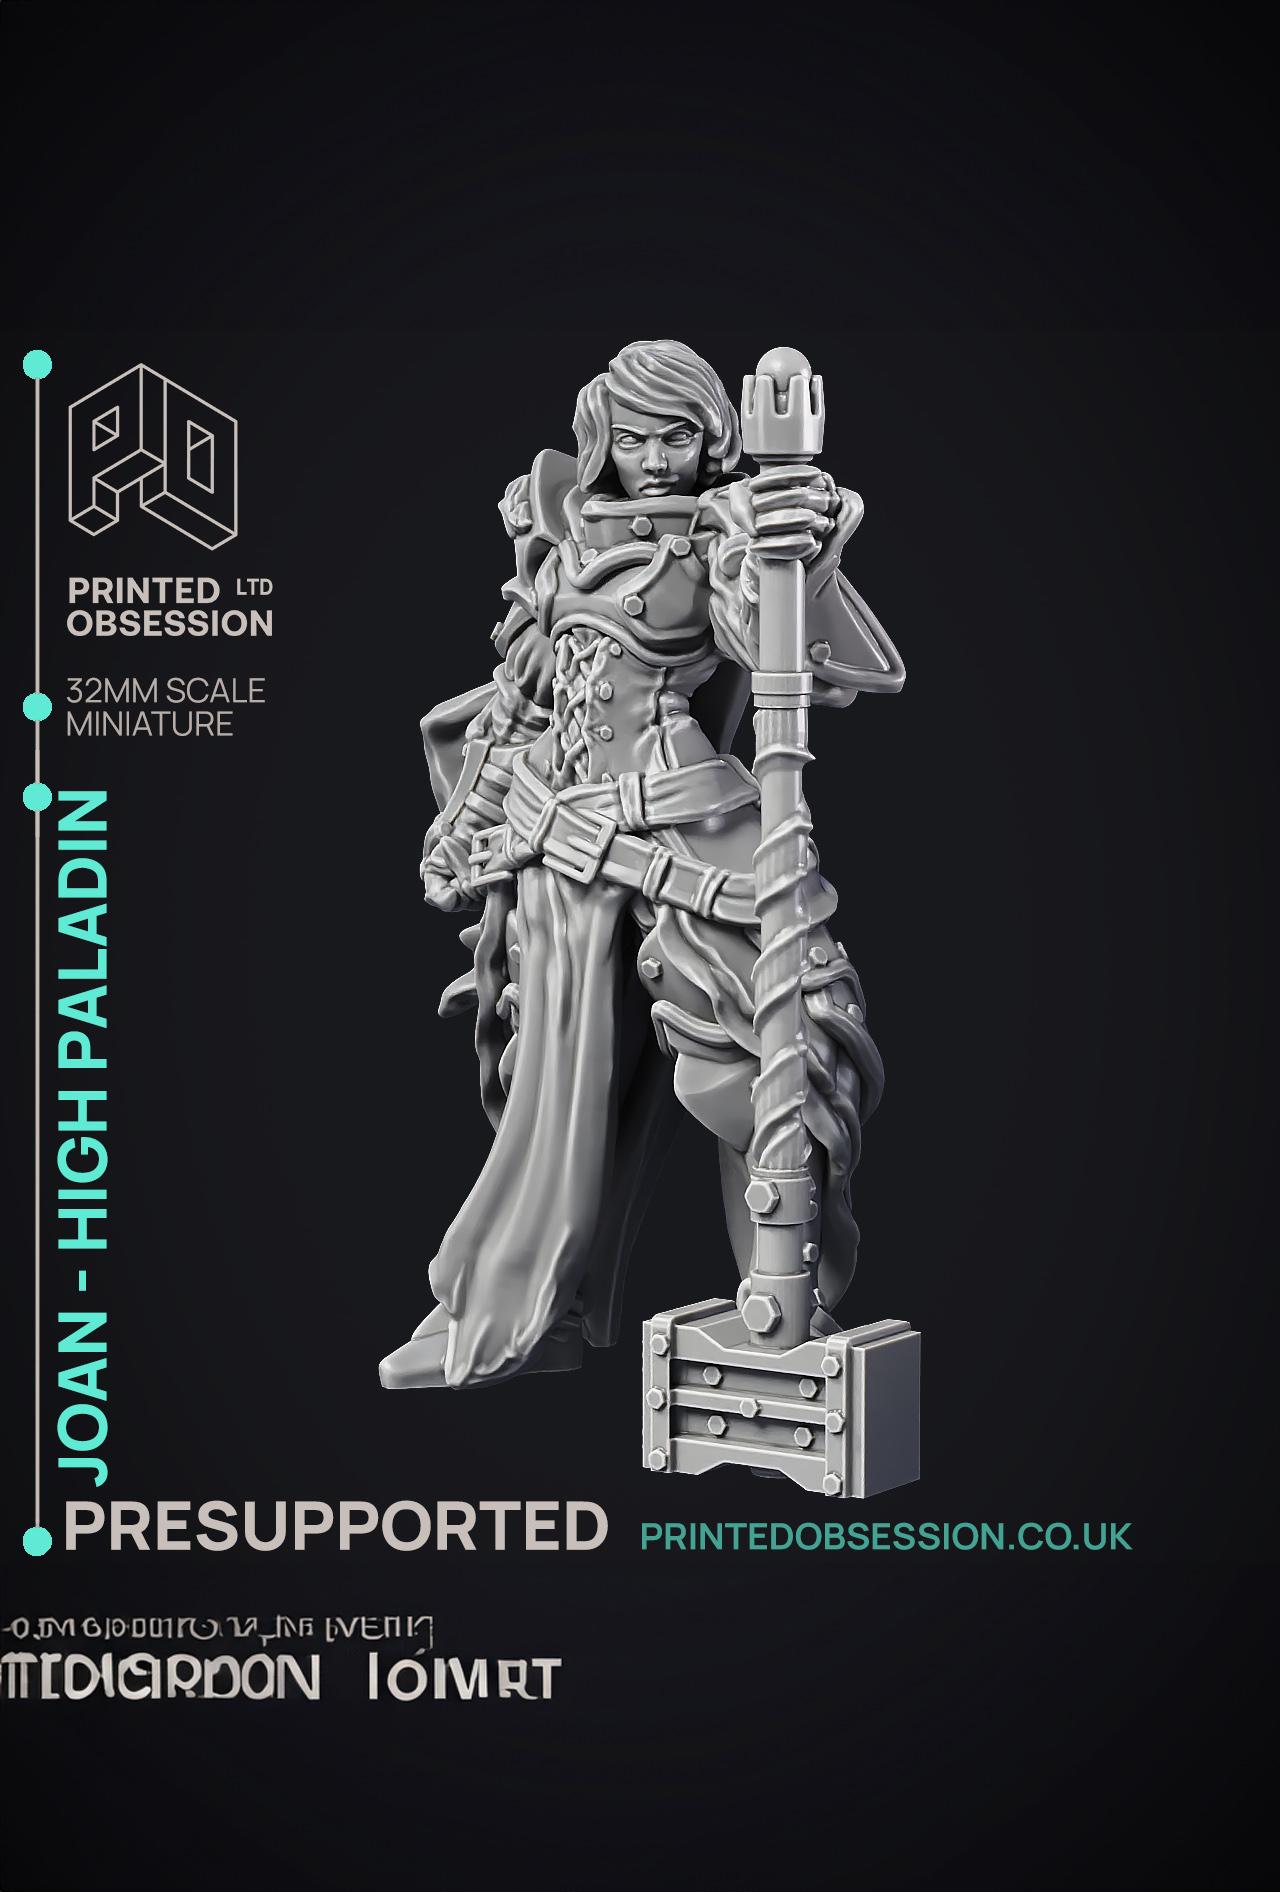 Joan - High Paladin - 2 Model - PRESUPPORTED - 32mm scale 3d model